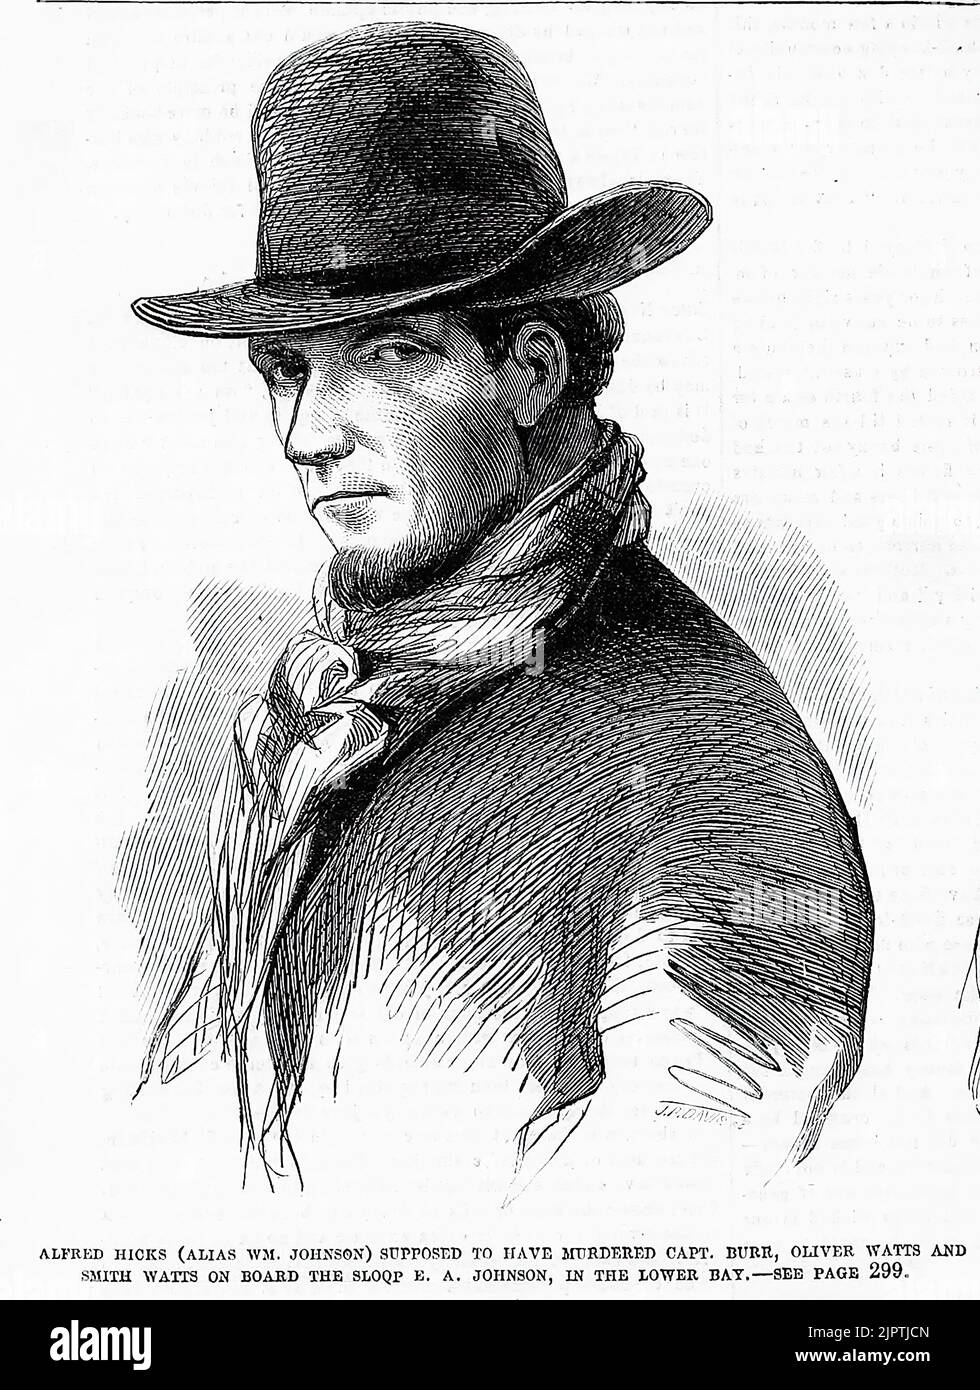 Portrait of Alred W. Hicks (alias William Johnson) supposed to have murdered Captain George H. Burr, Oliver Watts and Smith Watts on the sloop E. A. Johnson, in the Lower Bay. Later executed for piracy. 19th century illustration from Frank Leslie's Illustrated Newspaper Stock Photo